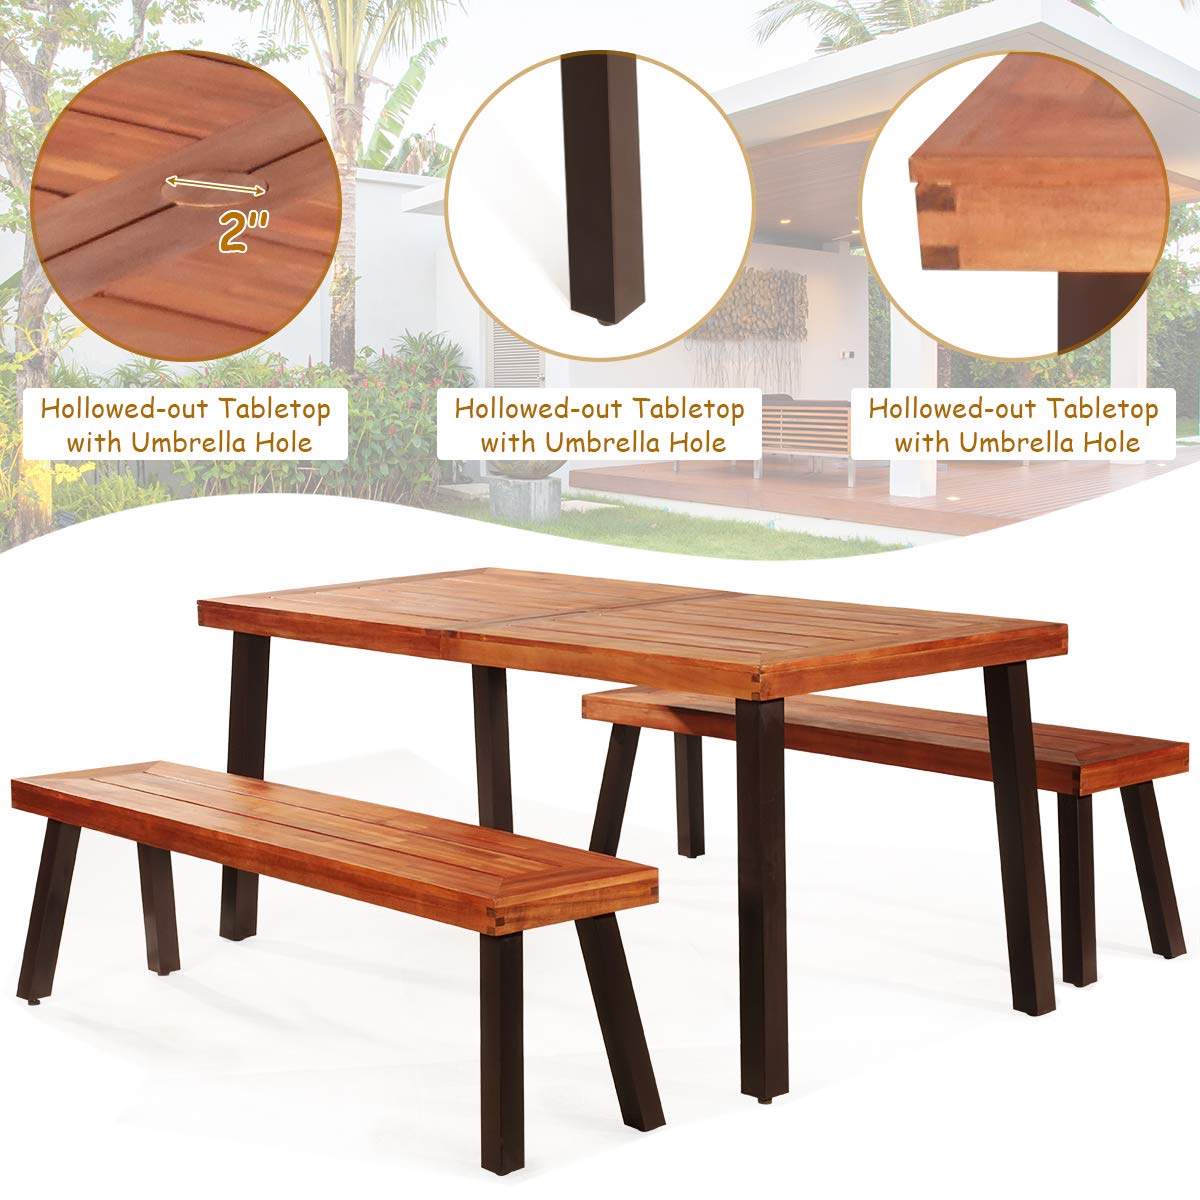 Patio Dining Table Set with 2 Benches, Outdoor Picnic Table Set with Umbrella Hole